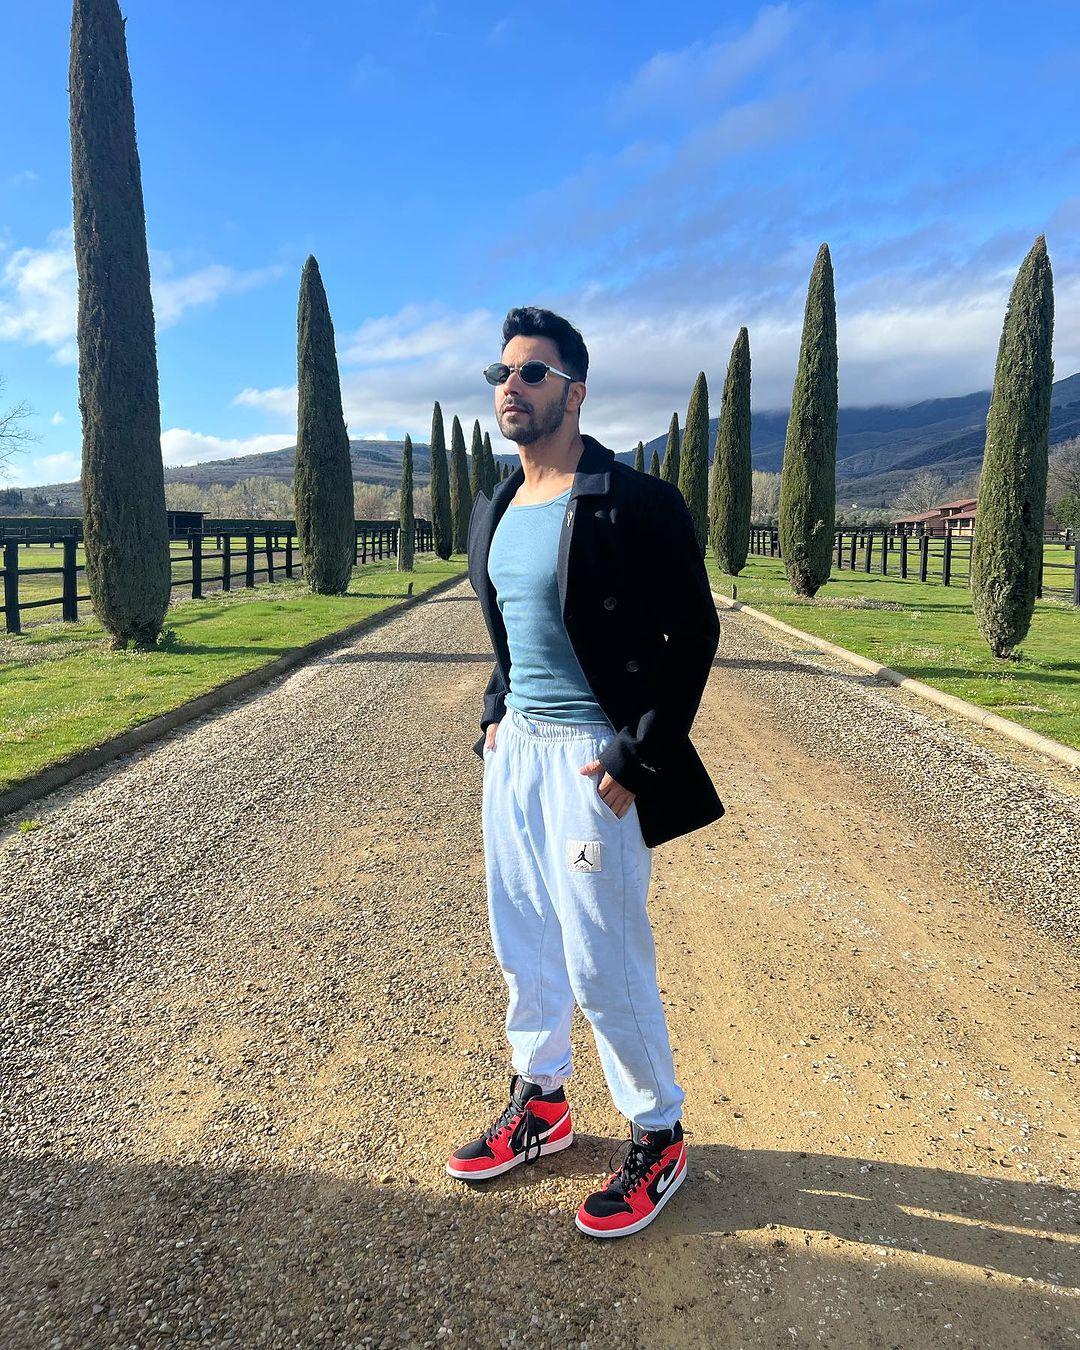 For cooler summer evenings or outdoor events, Varun Dhawan effortlessly layers his outfits with lightweight jackets or shirts.